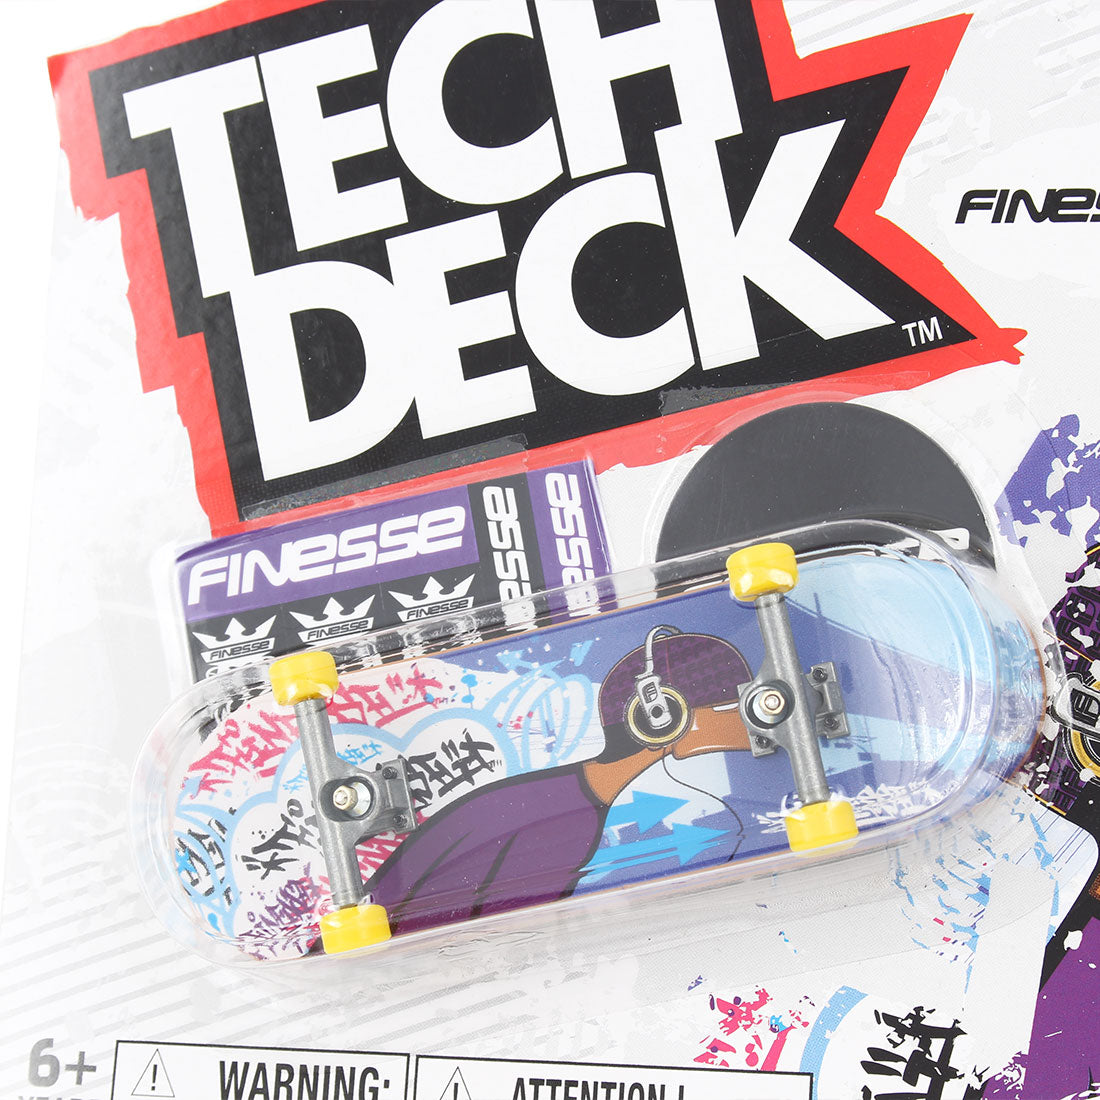 Tech Deck 2022 Series - Finesse - Blue Tag